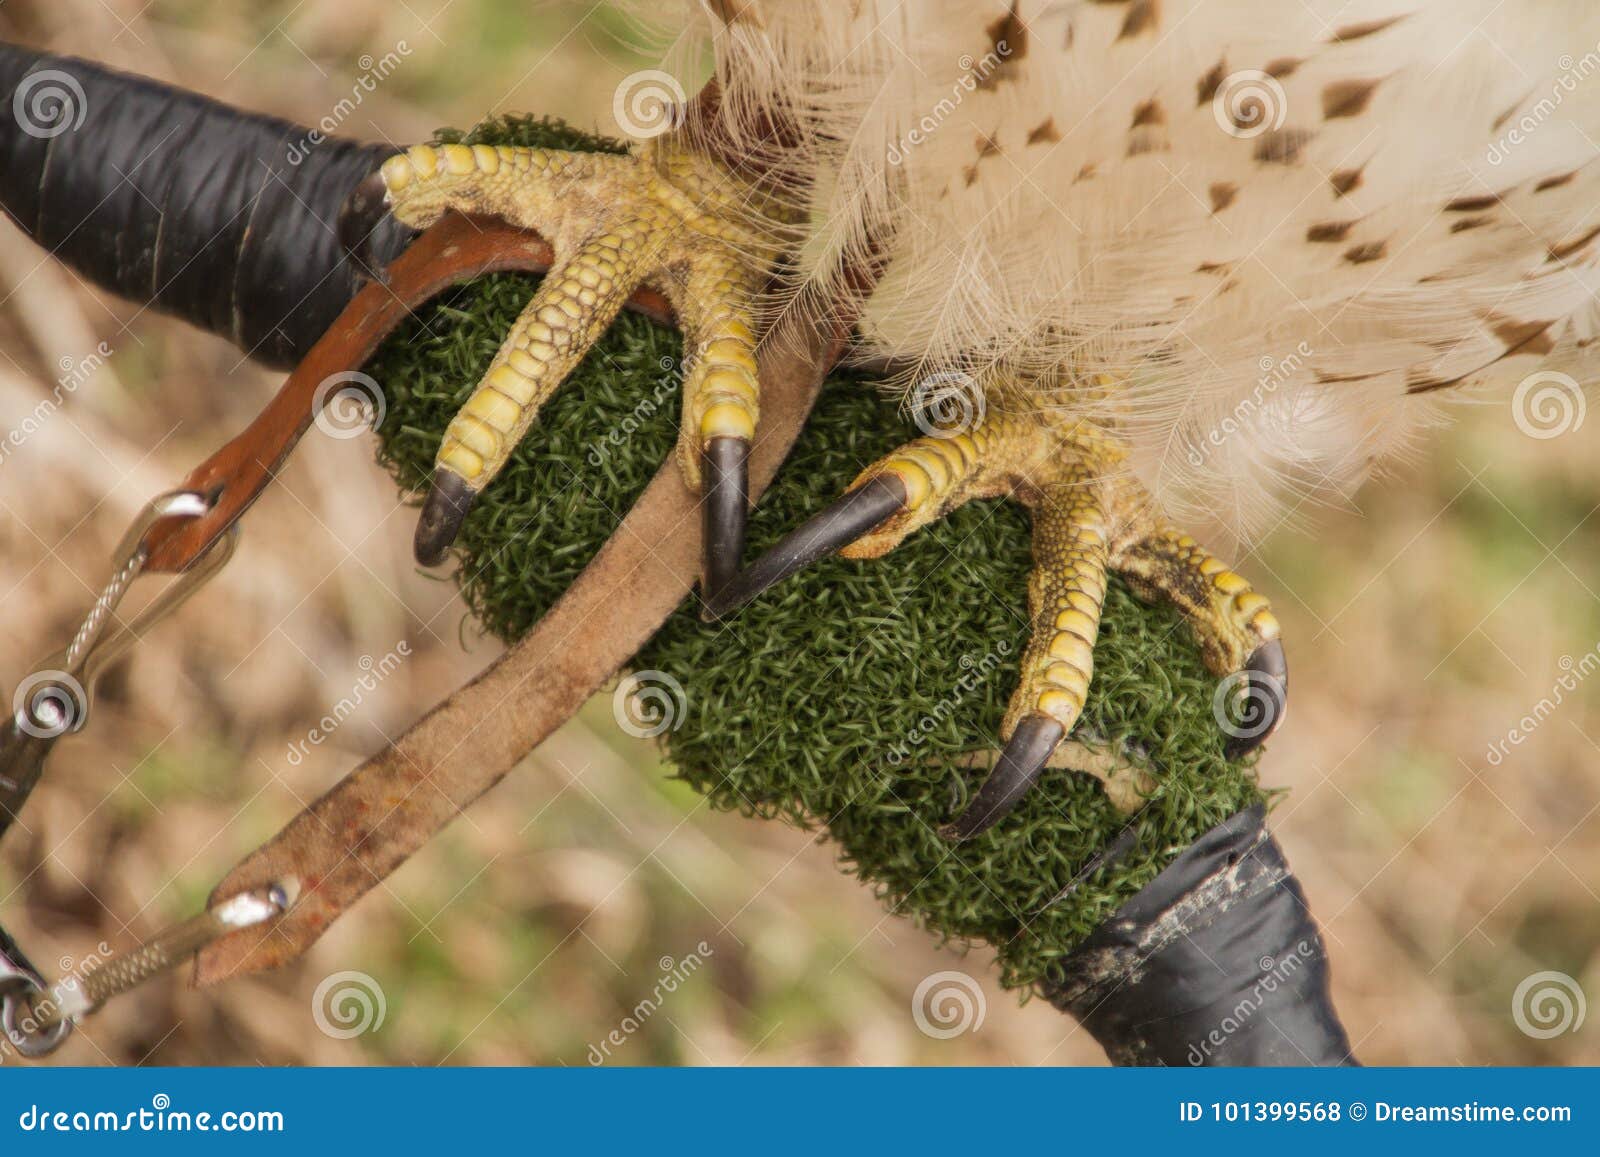 close up of leashed feet/talons of a red tailed hawk